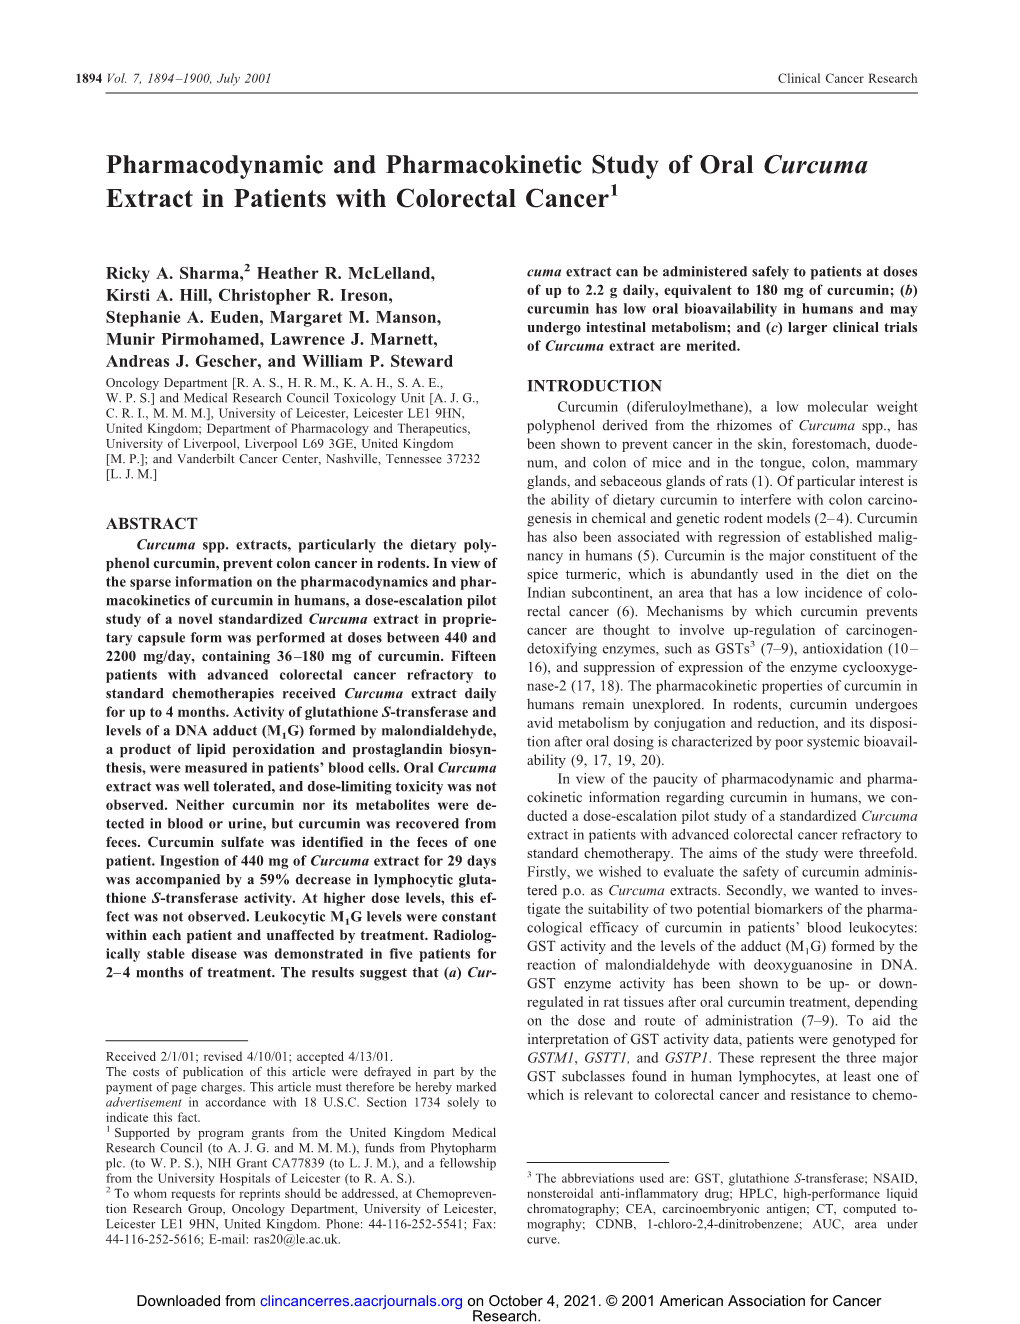 Pharmacodynamic and Pharmacokinetic Study of Oral Curcuma Extract in Patients with Colorectal Cancer1